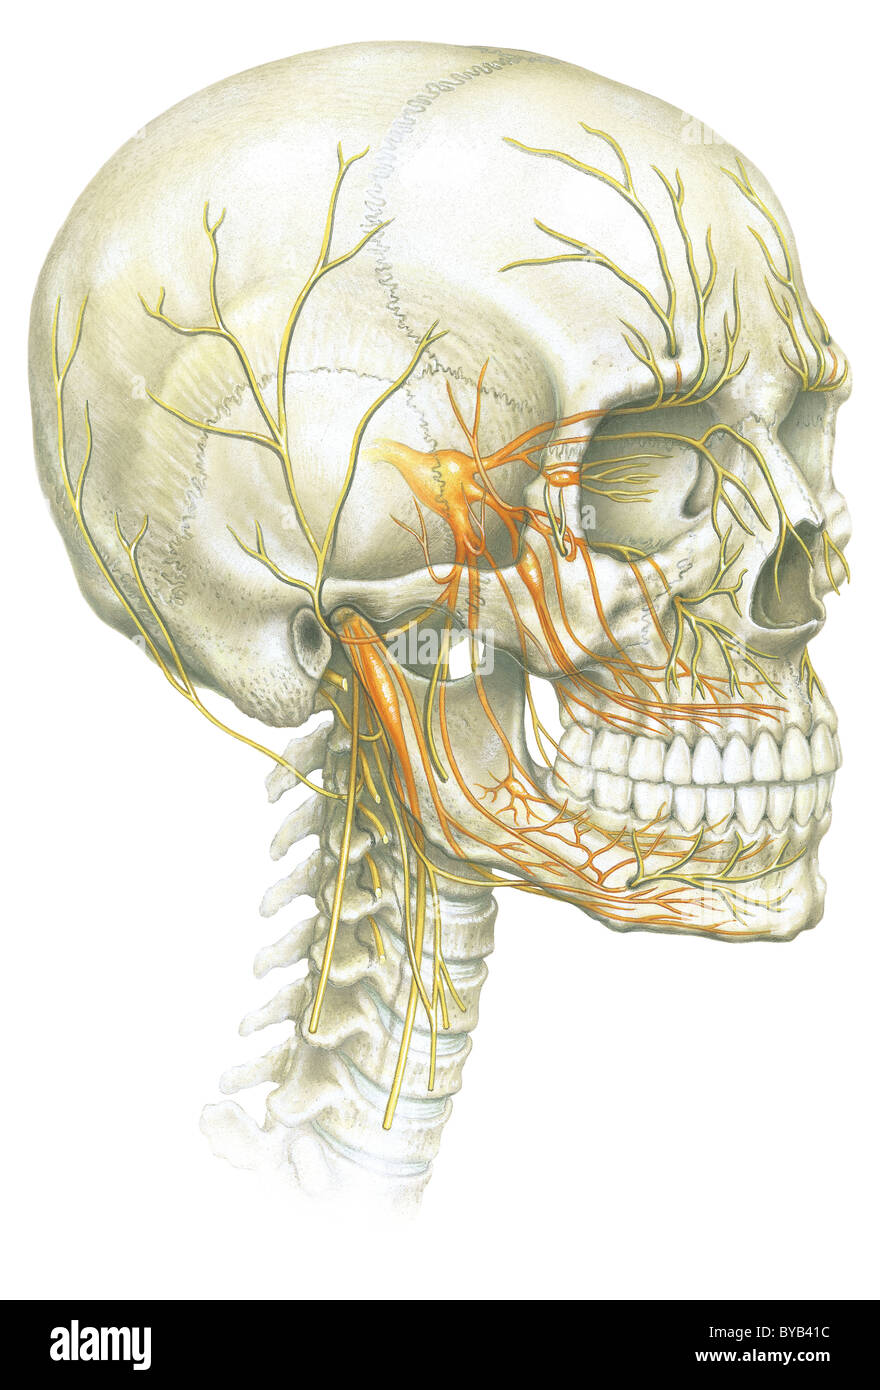 An illustration of human skull and nerve system Stock Photo - Alamy